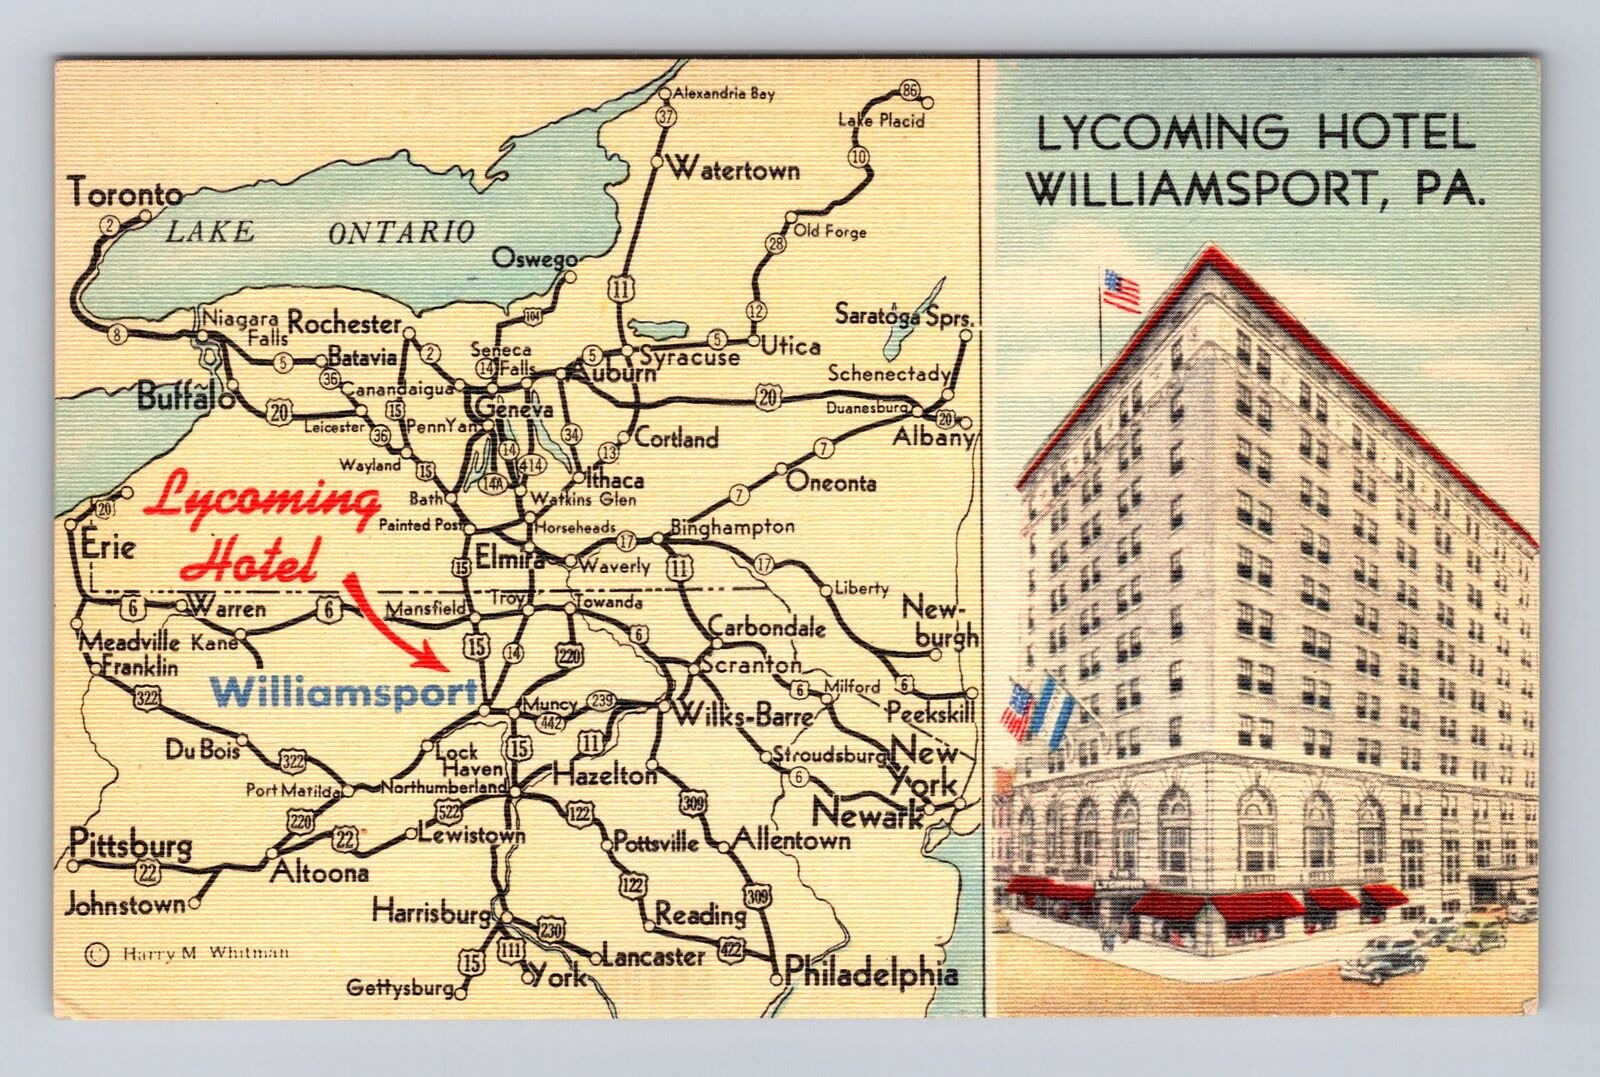 Williamsport PA-Pennsylvania, Lycoming Hotel, Map of Area, Vintage Postcard